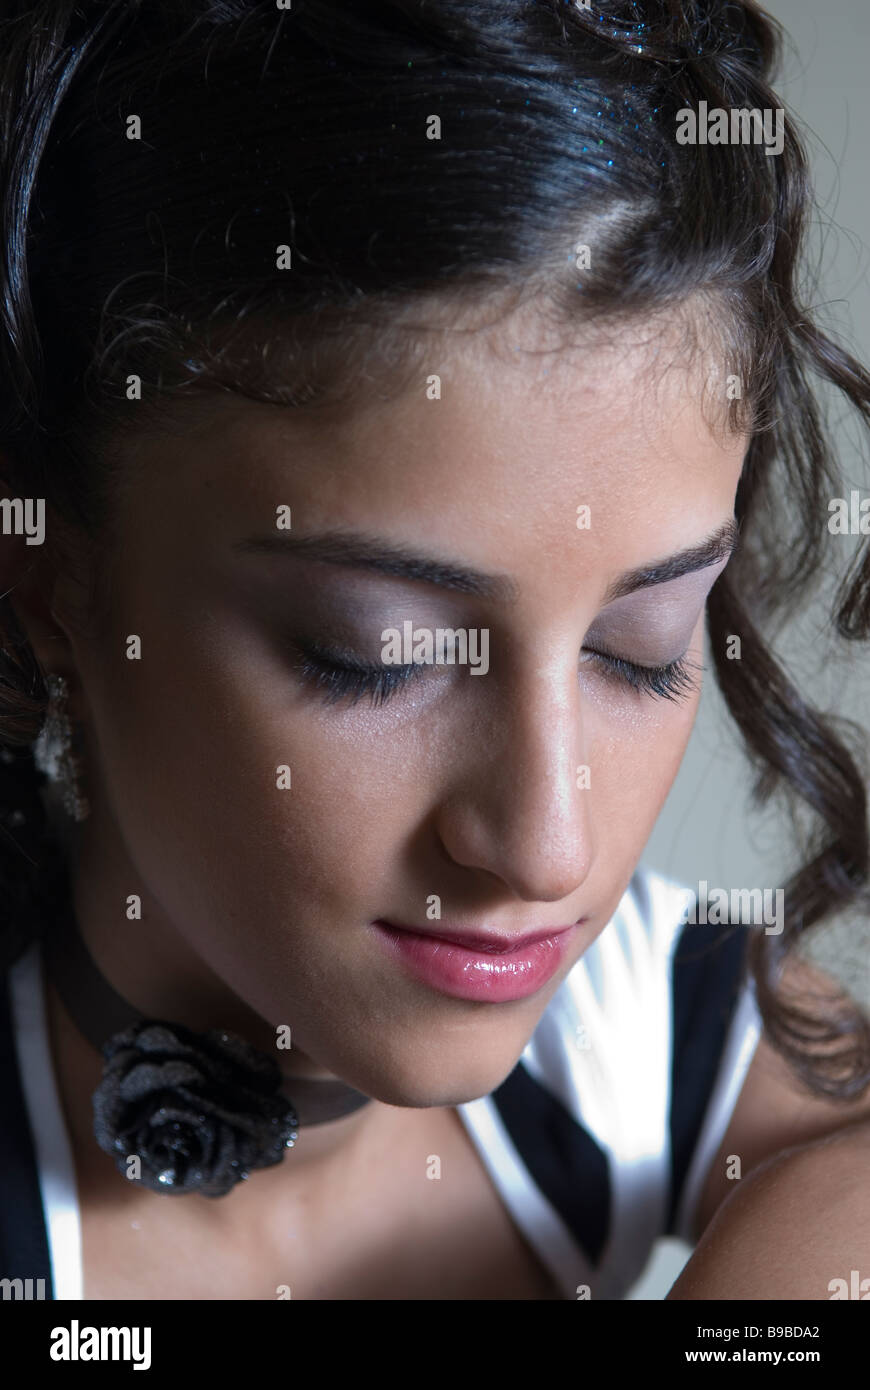 Close up of a young woman wearing make up and eyes closed Stock Photo